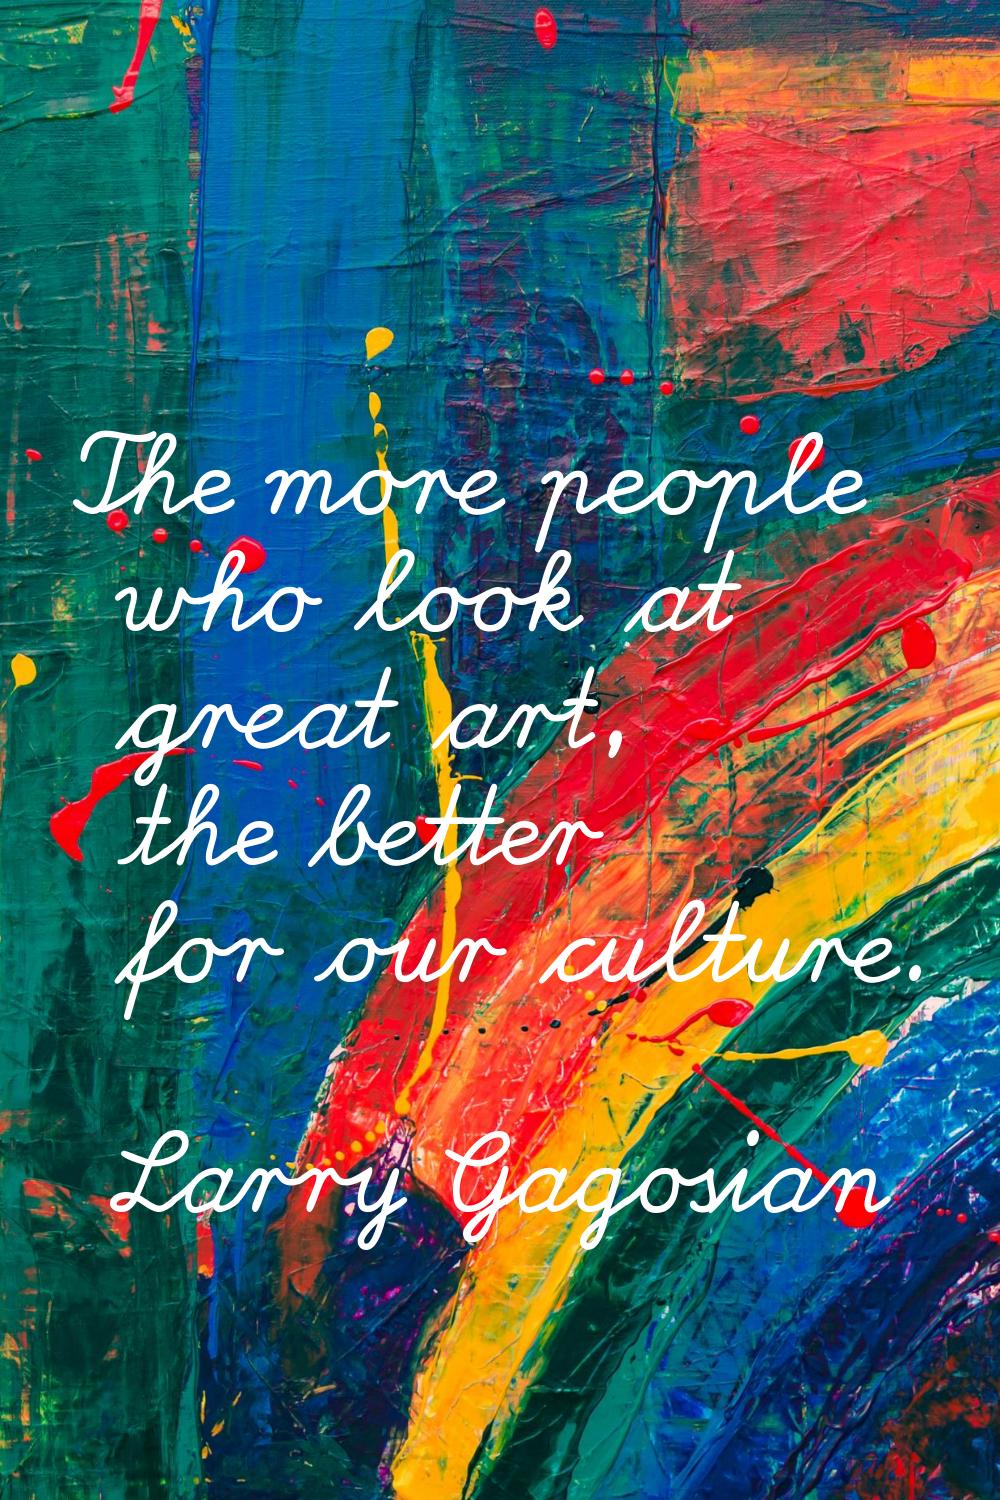 The more people who look at great art, the better for our culture.